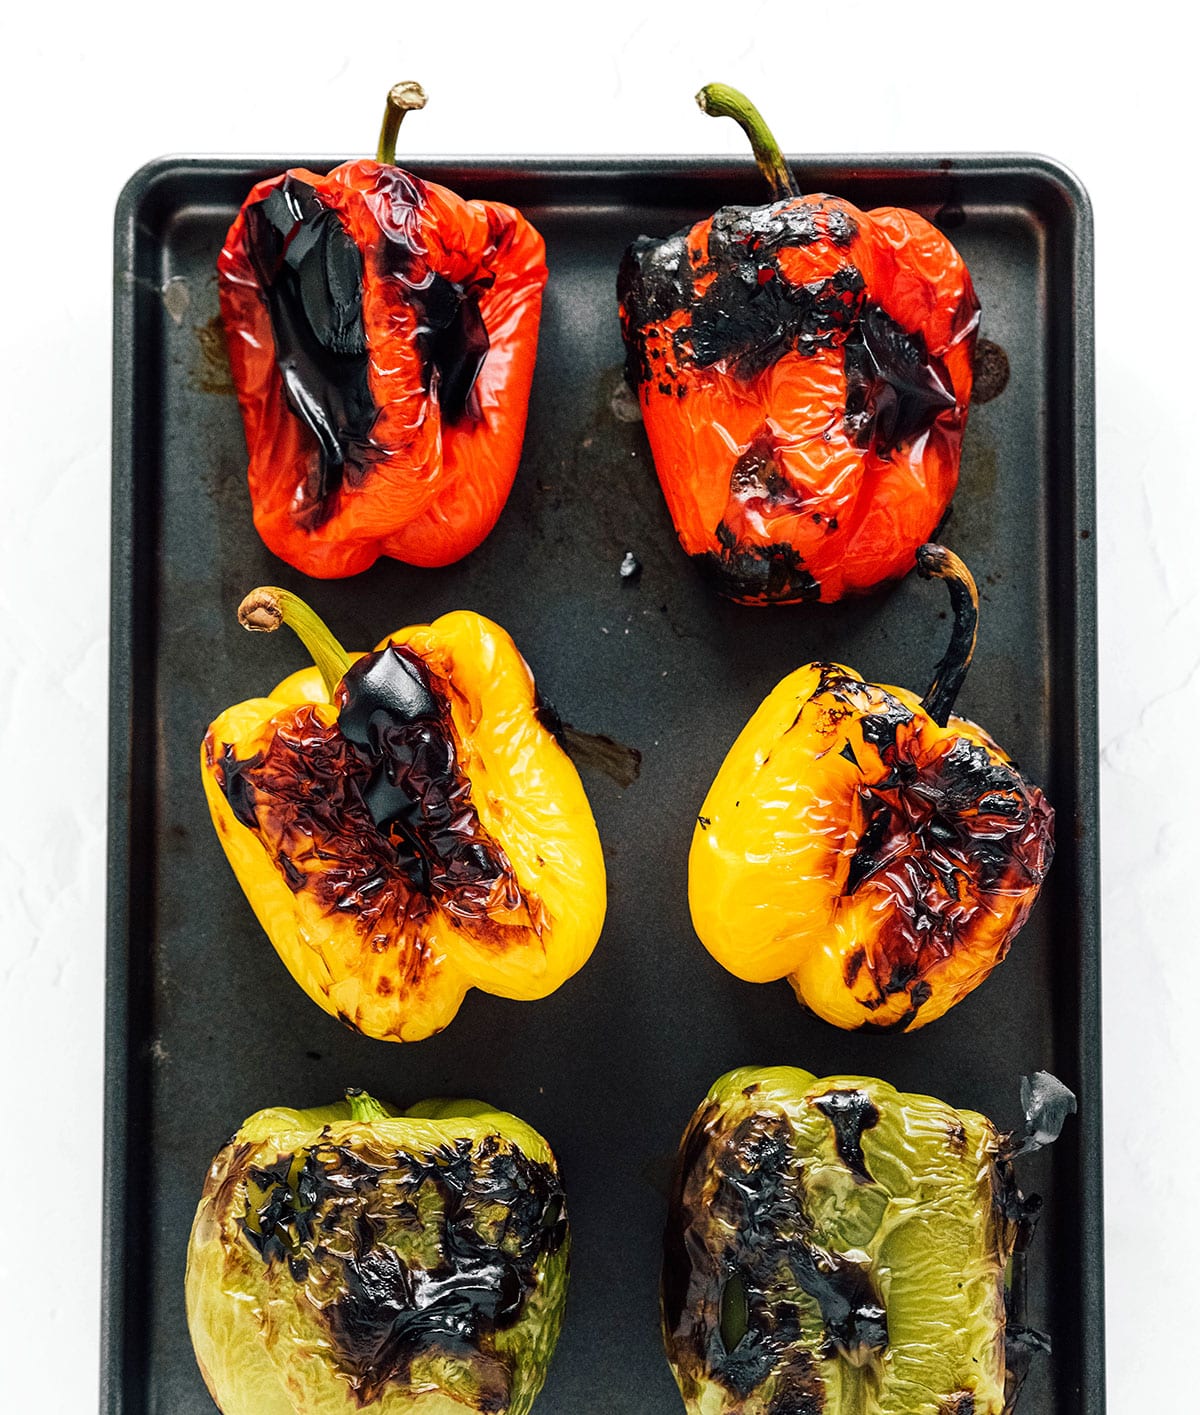 Red, green, and yellow peppers charred and laid out on a baking tray.